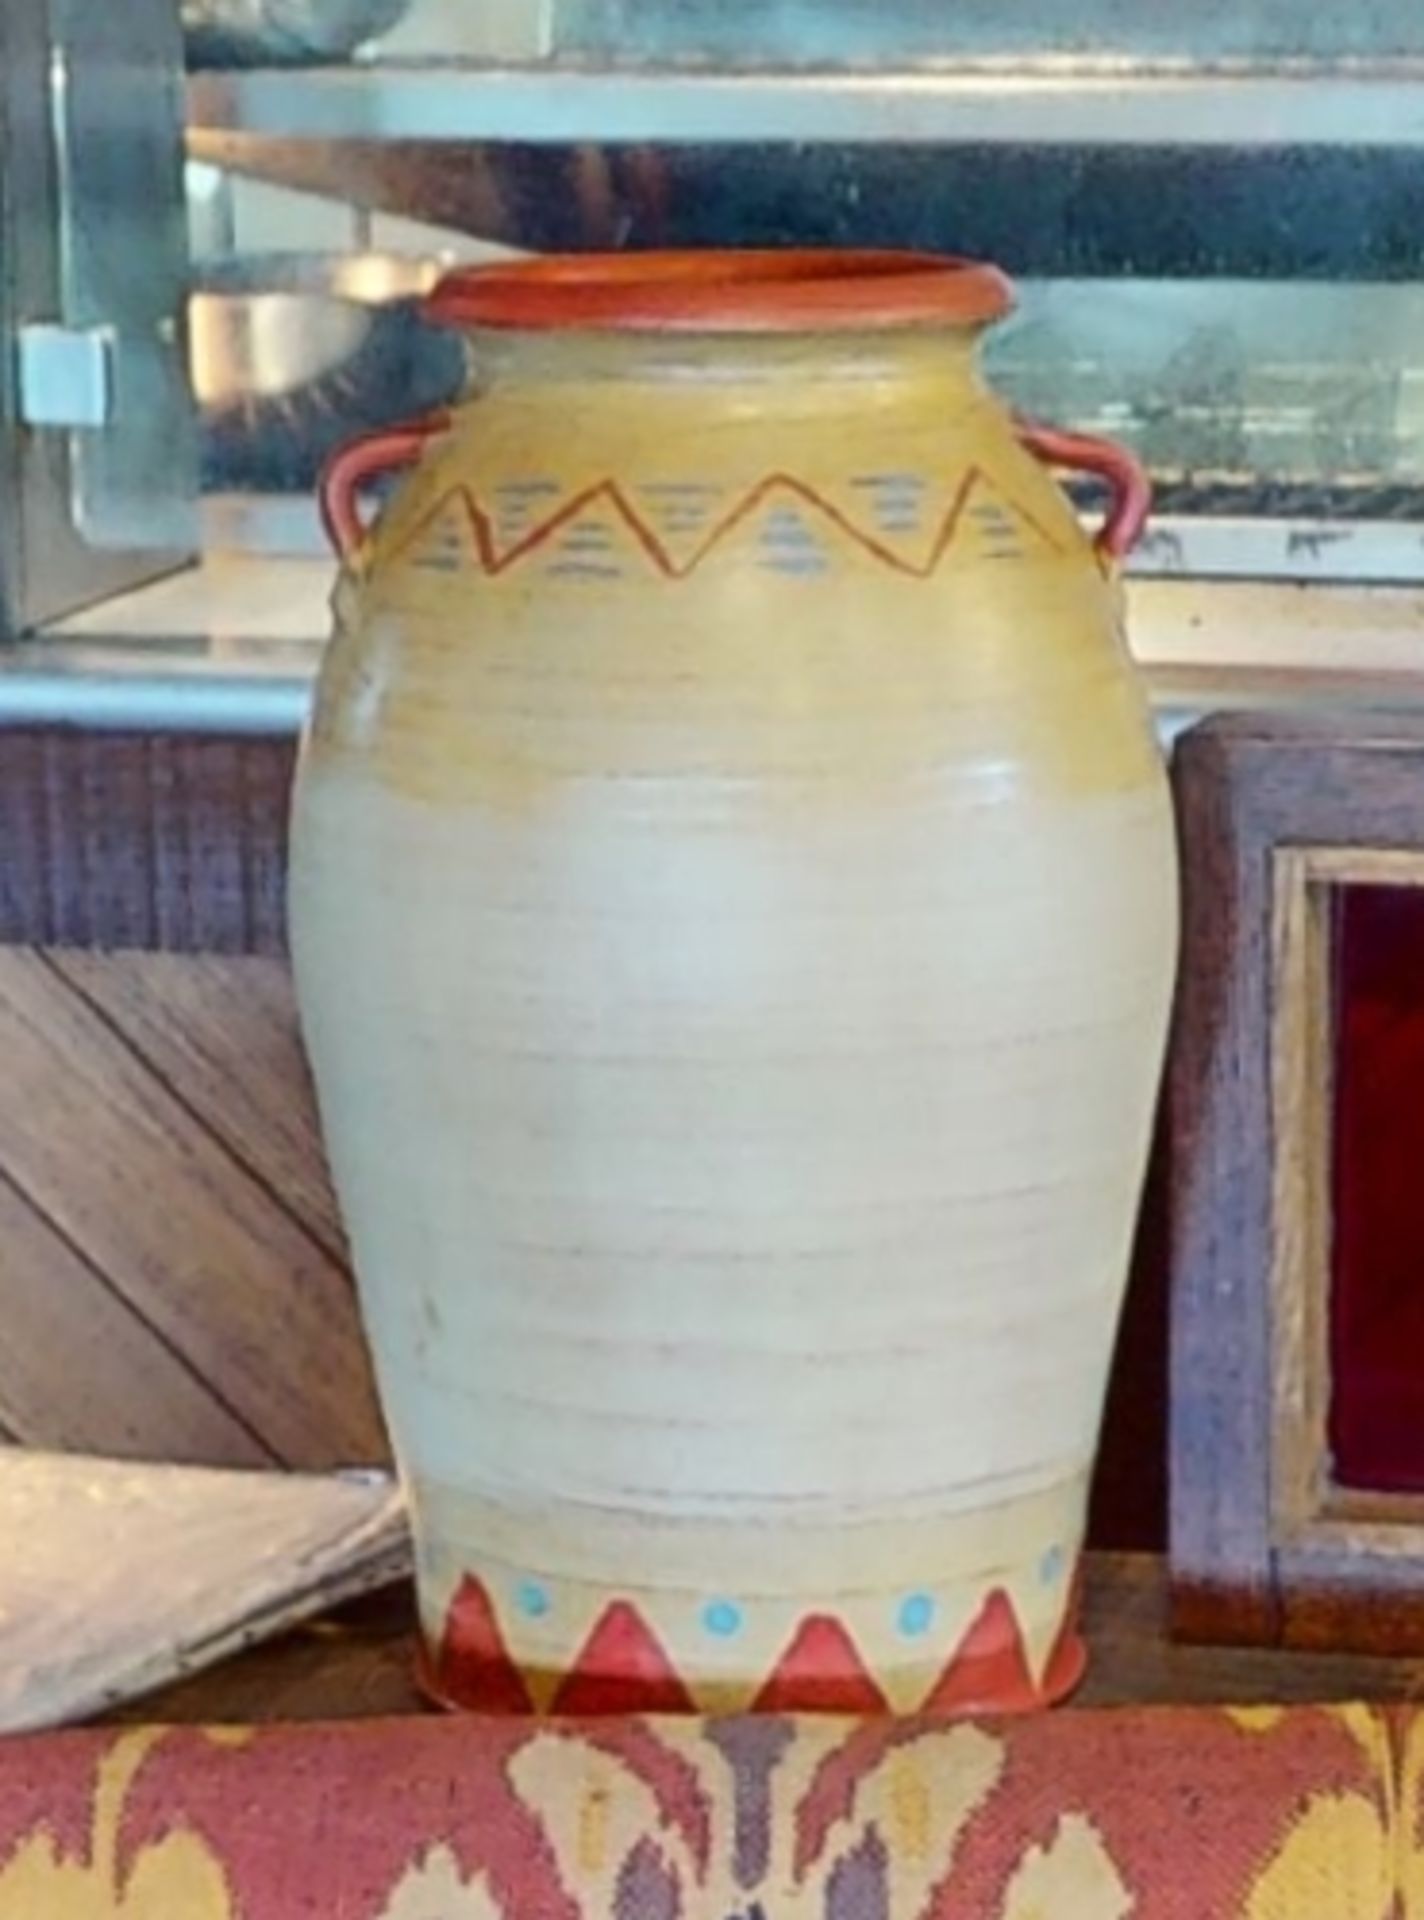 Approx 14 x Assorted Jugs, Vases and Buckets From a Mexican Themed Restaurant Restaurant - Image 6 of 7